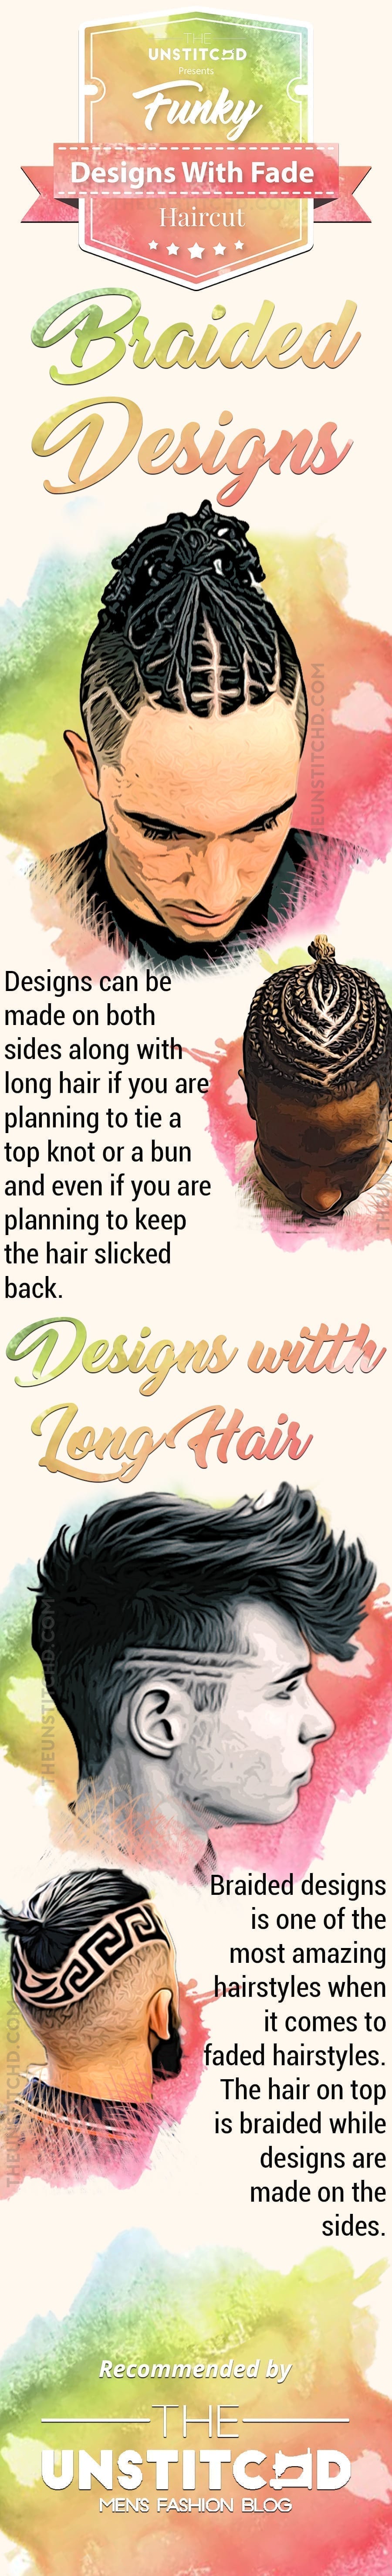 Design-with-fade-hairstyle-info